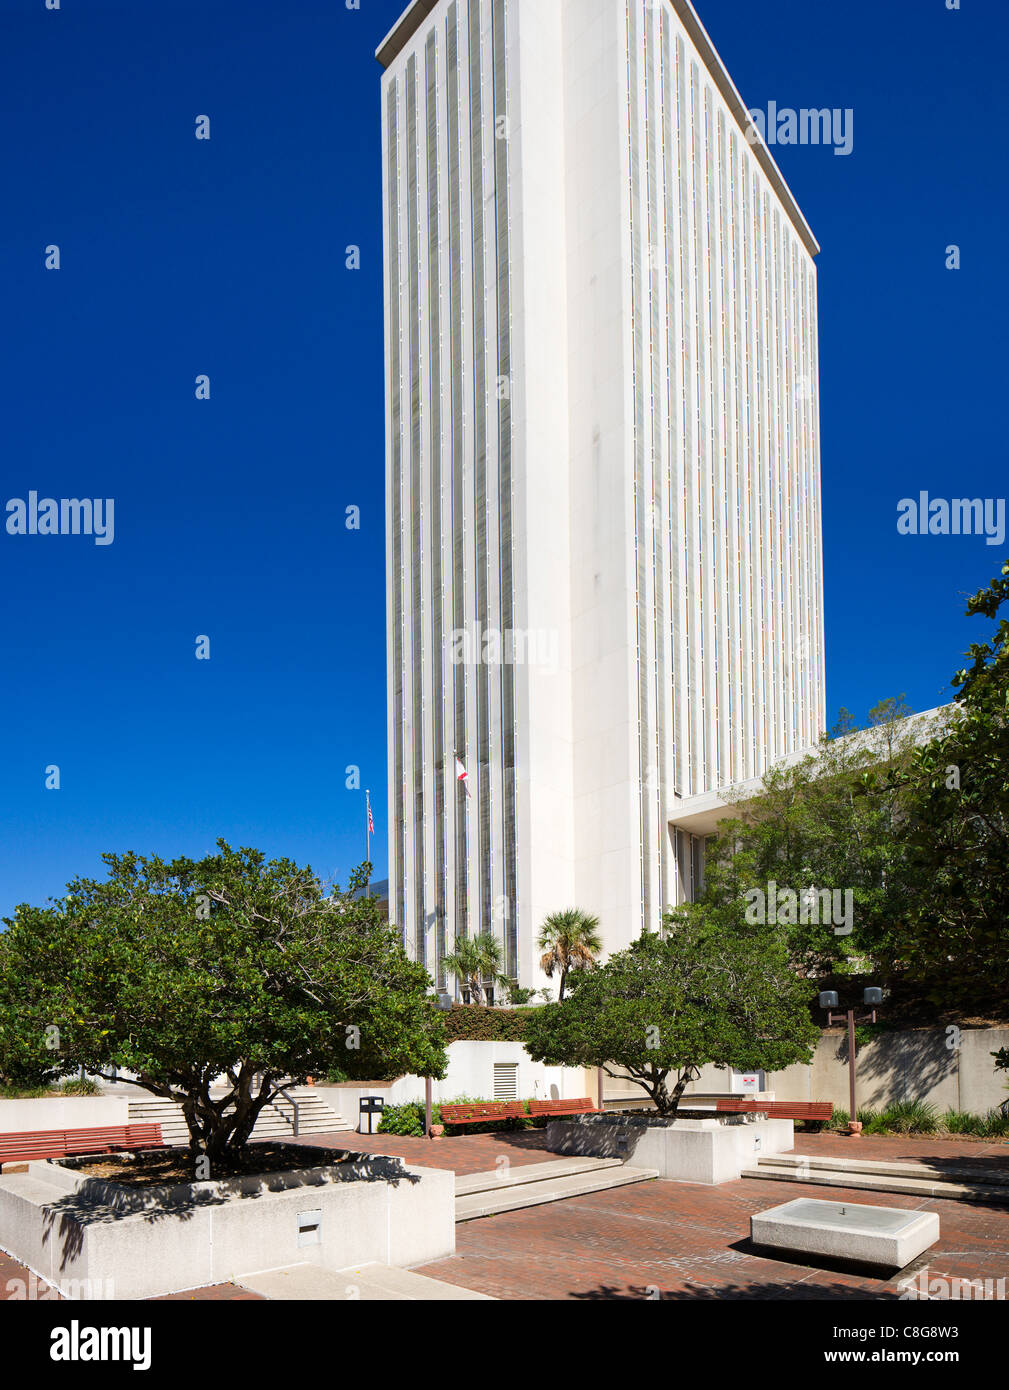 The modern State Capitol Building, Tallahassee, Florida, USA Stockfoto